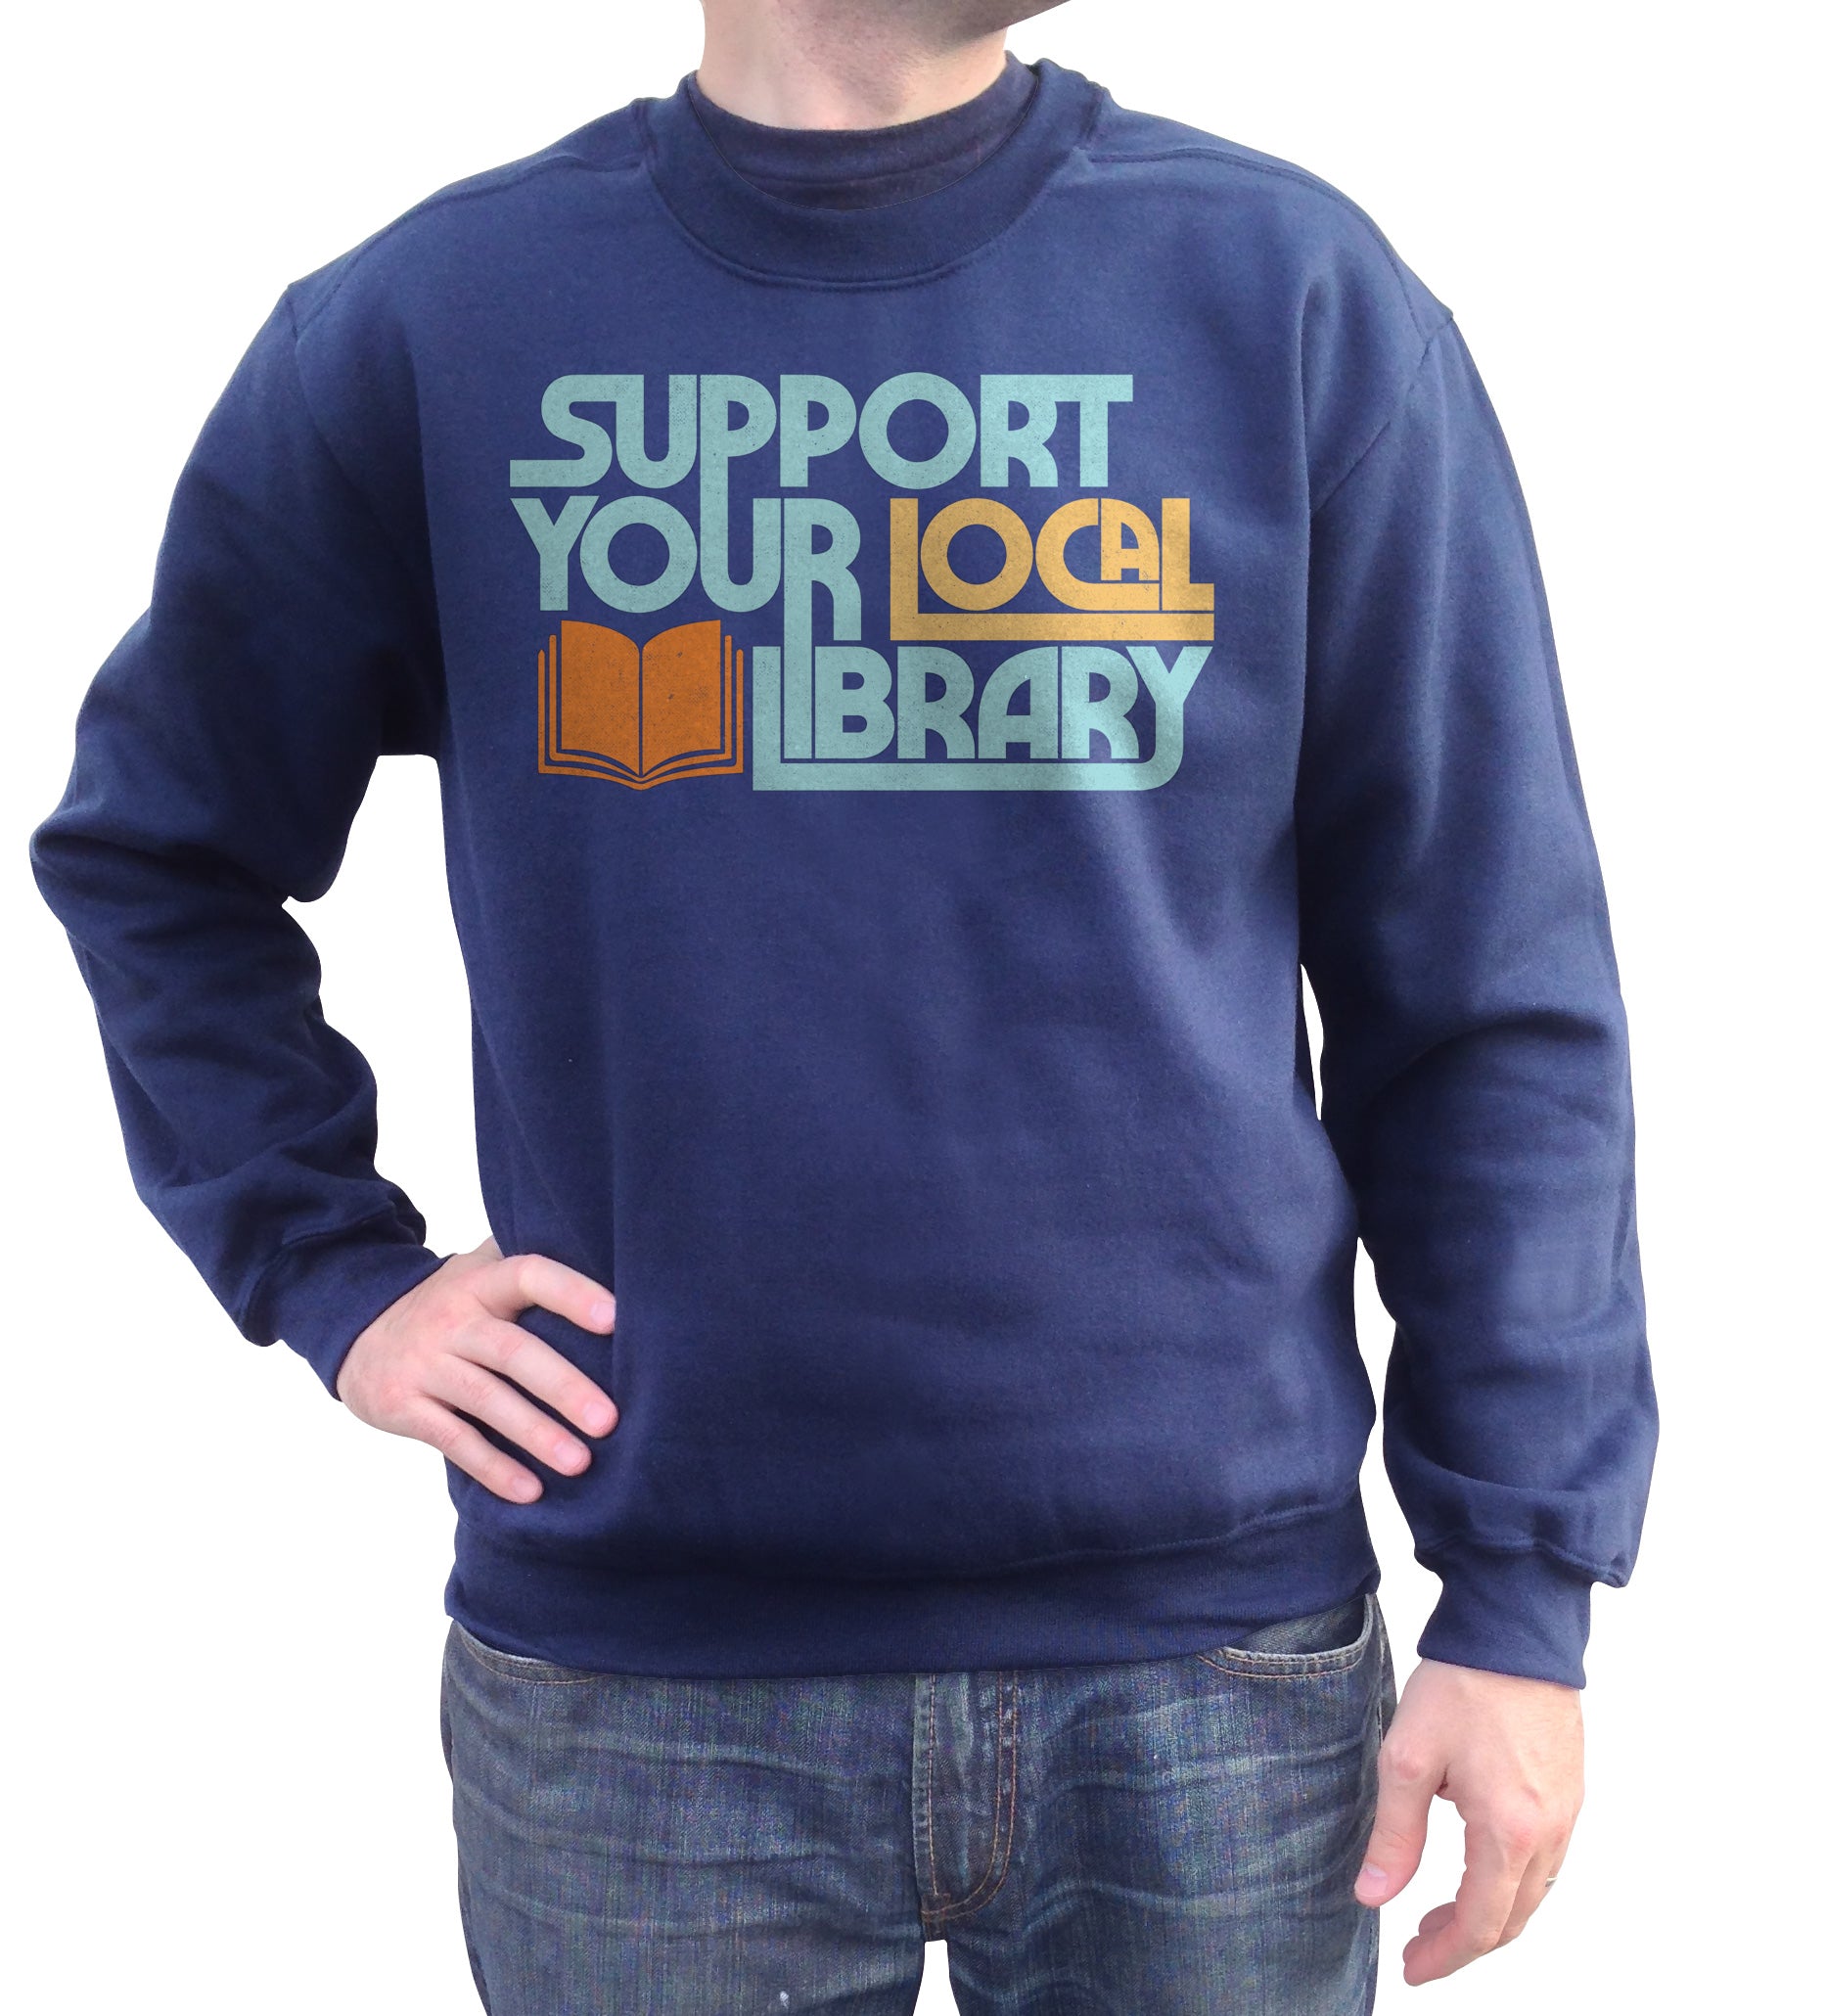 Unisex Support Your Local Library Sweatshirt